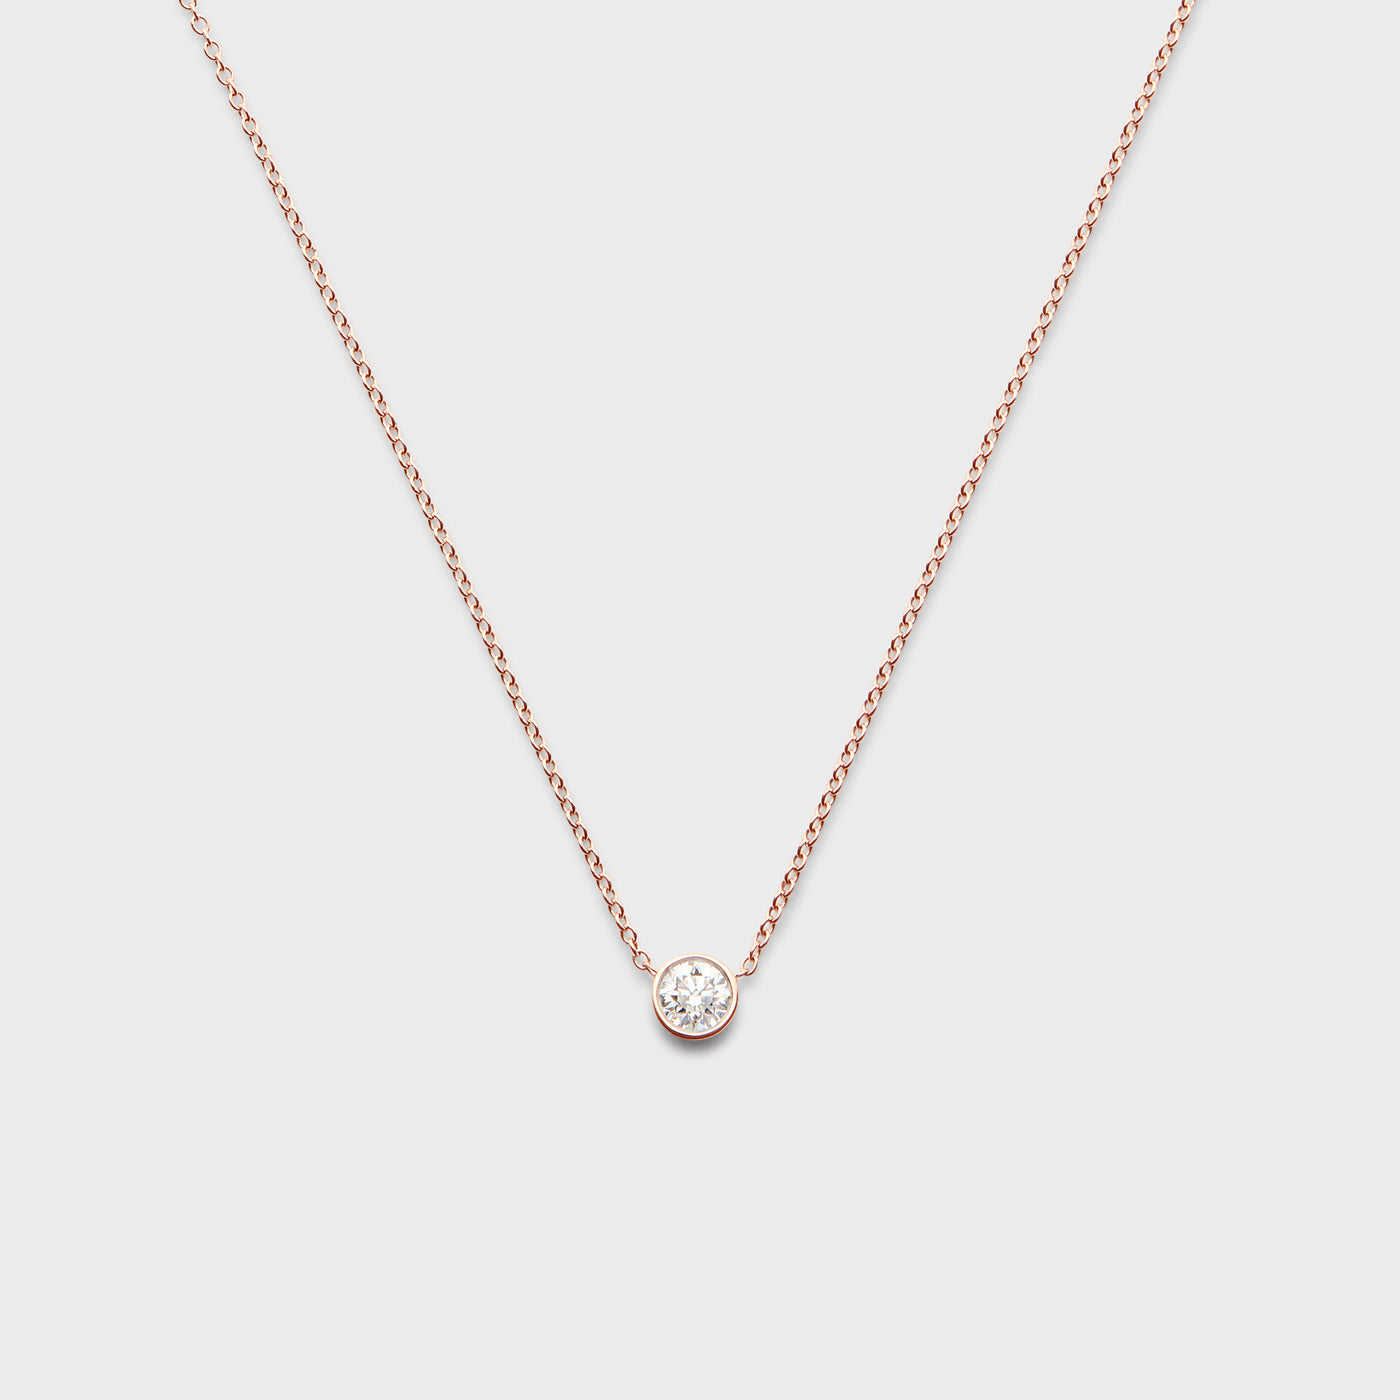 Classic Bezel Pendant - The Clear Cut Collection